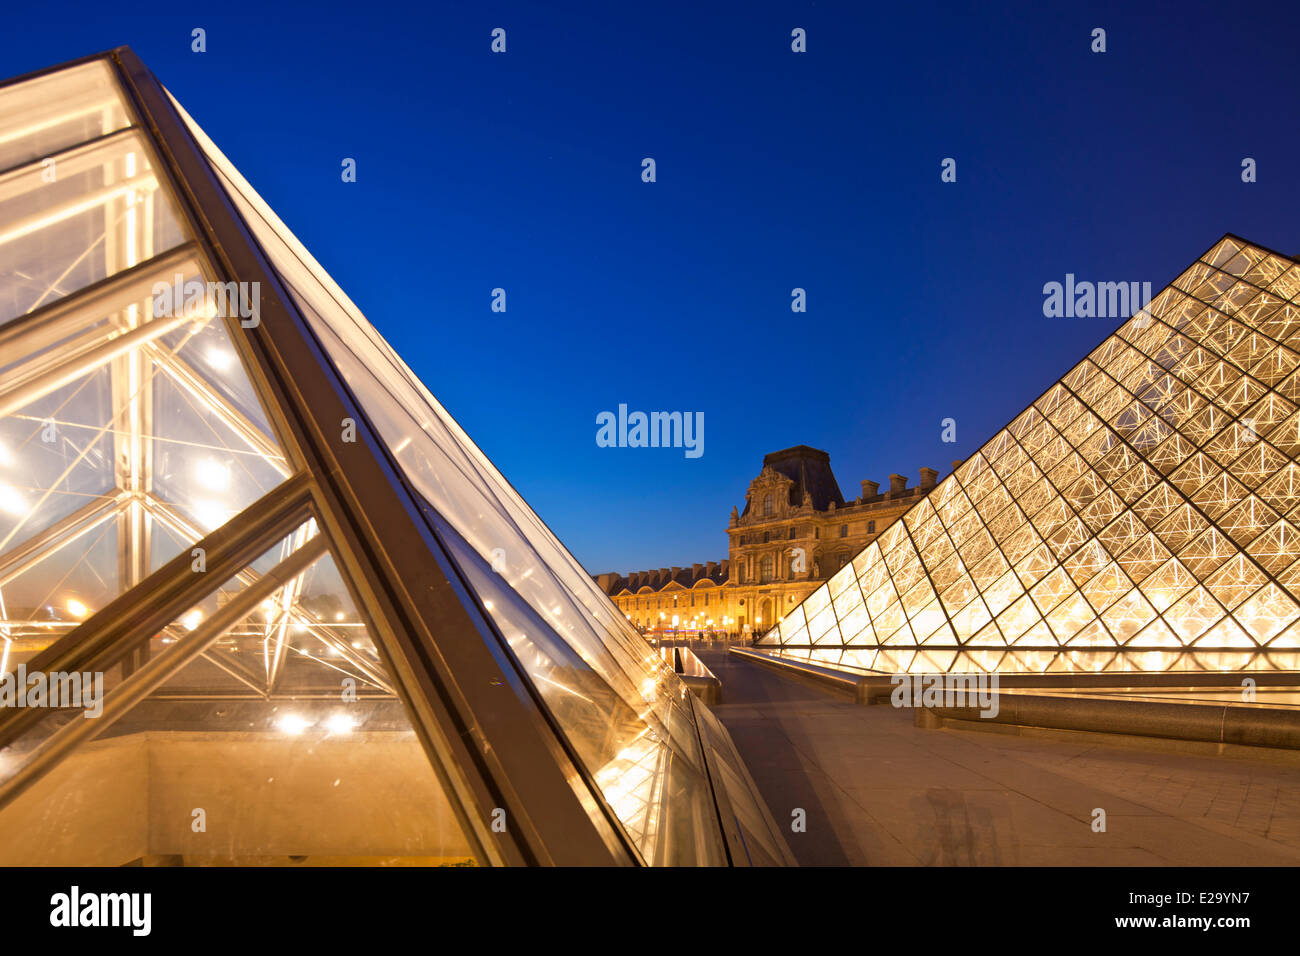 France, Paris, Louvre Museum, the Louvre pyramid by architect Ming Pei Stock Photo